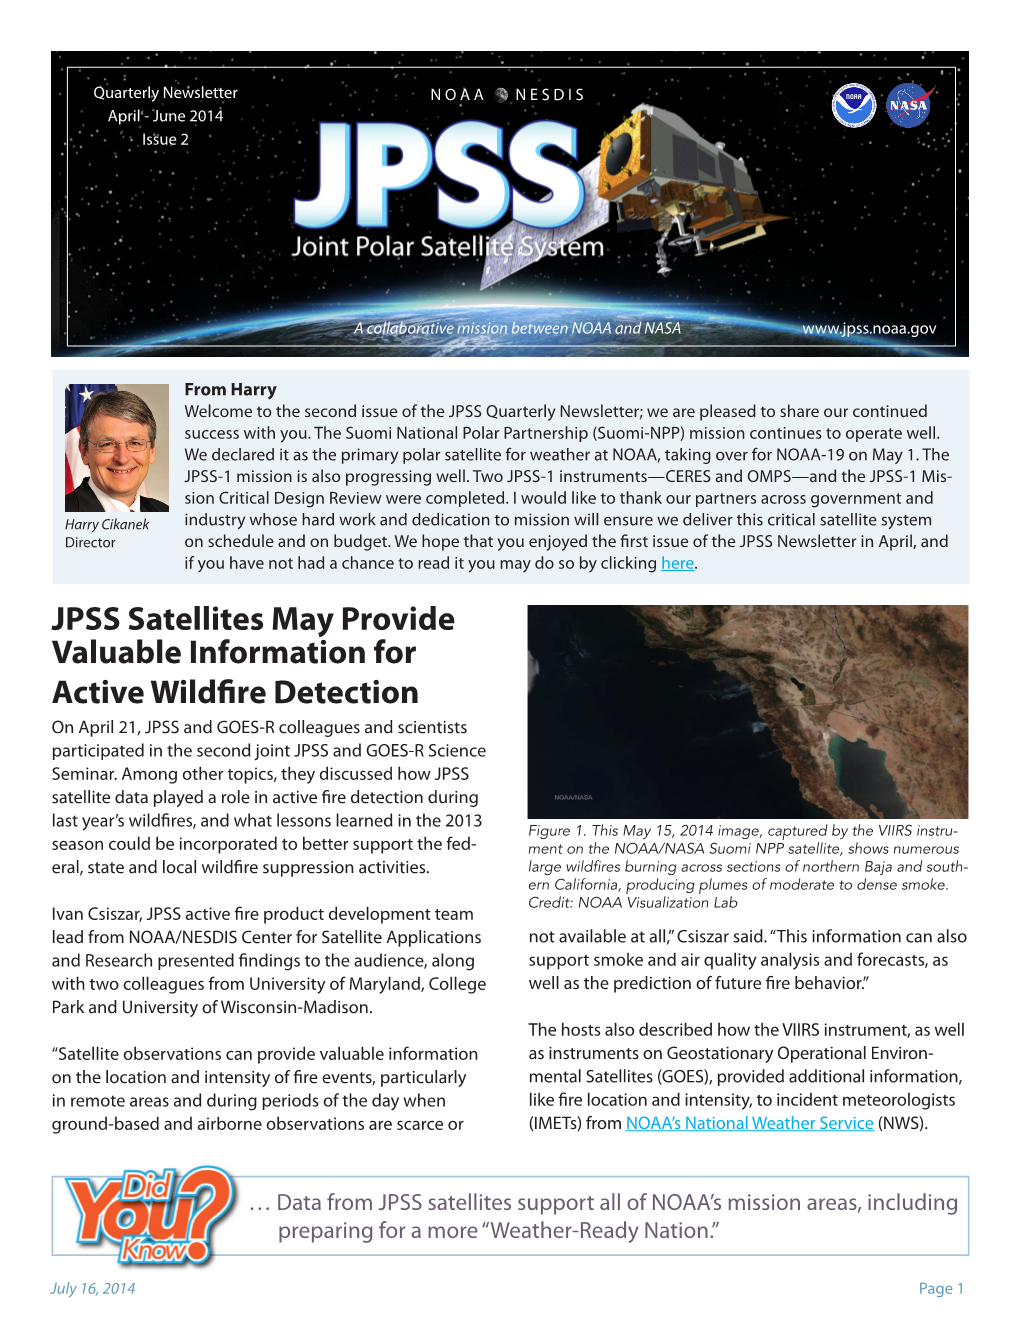 JPSS Satellites May Provide Valuable Information for Active Wildfire